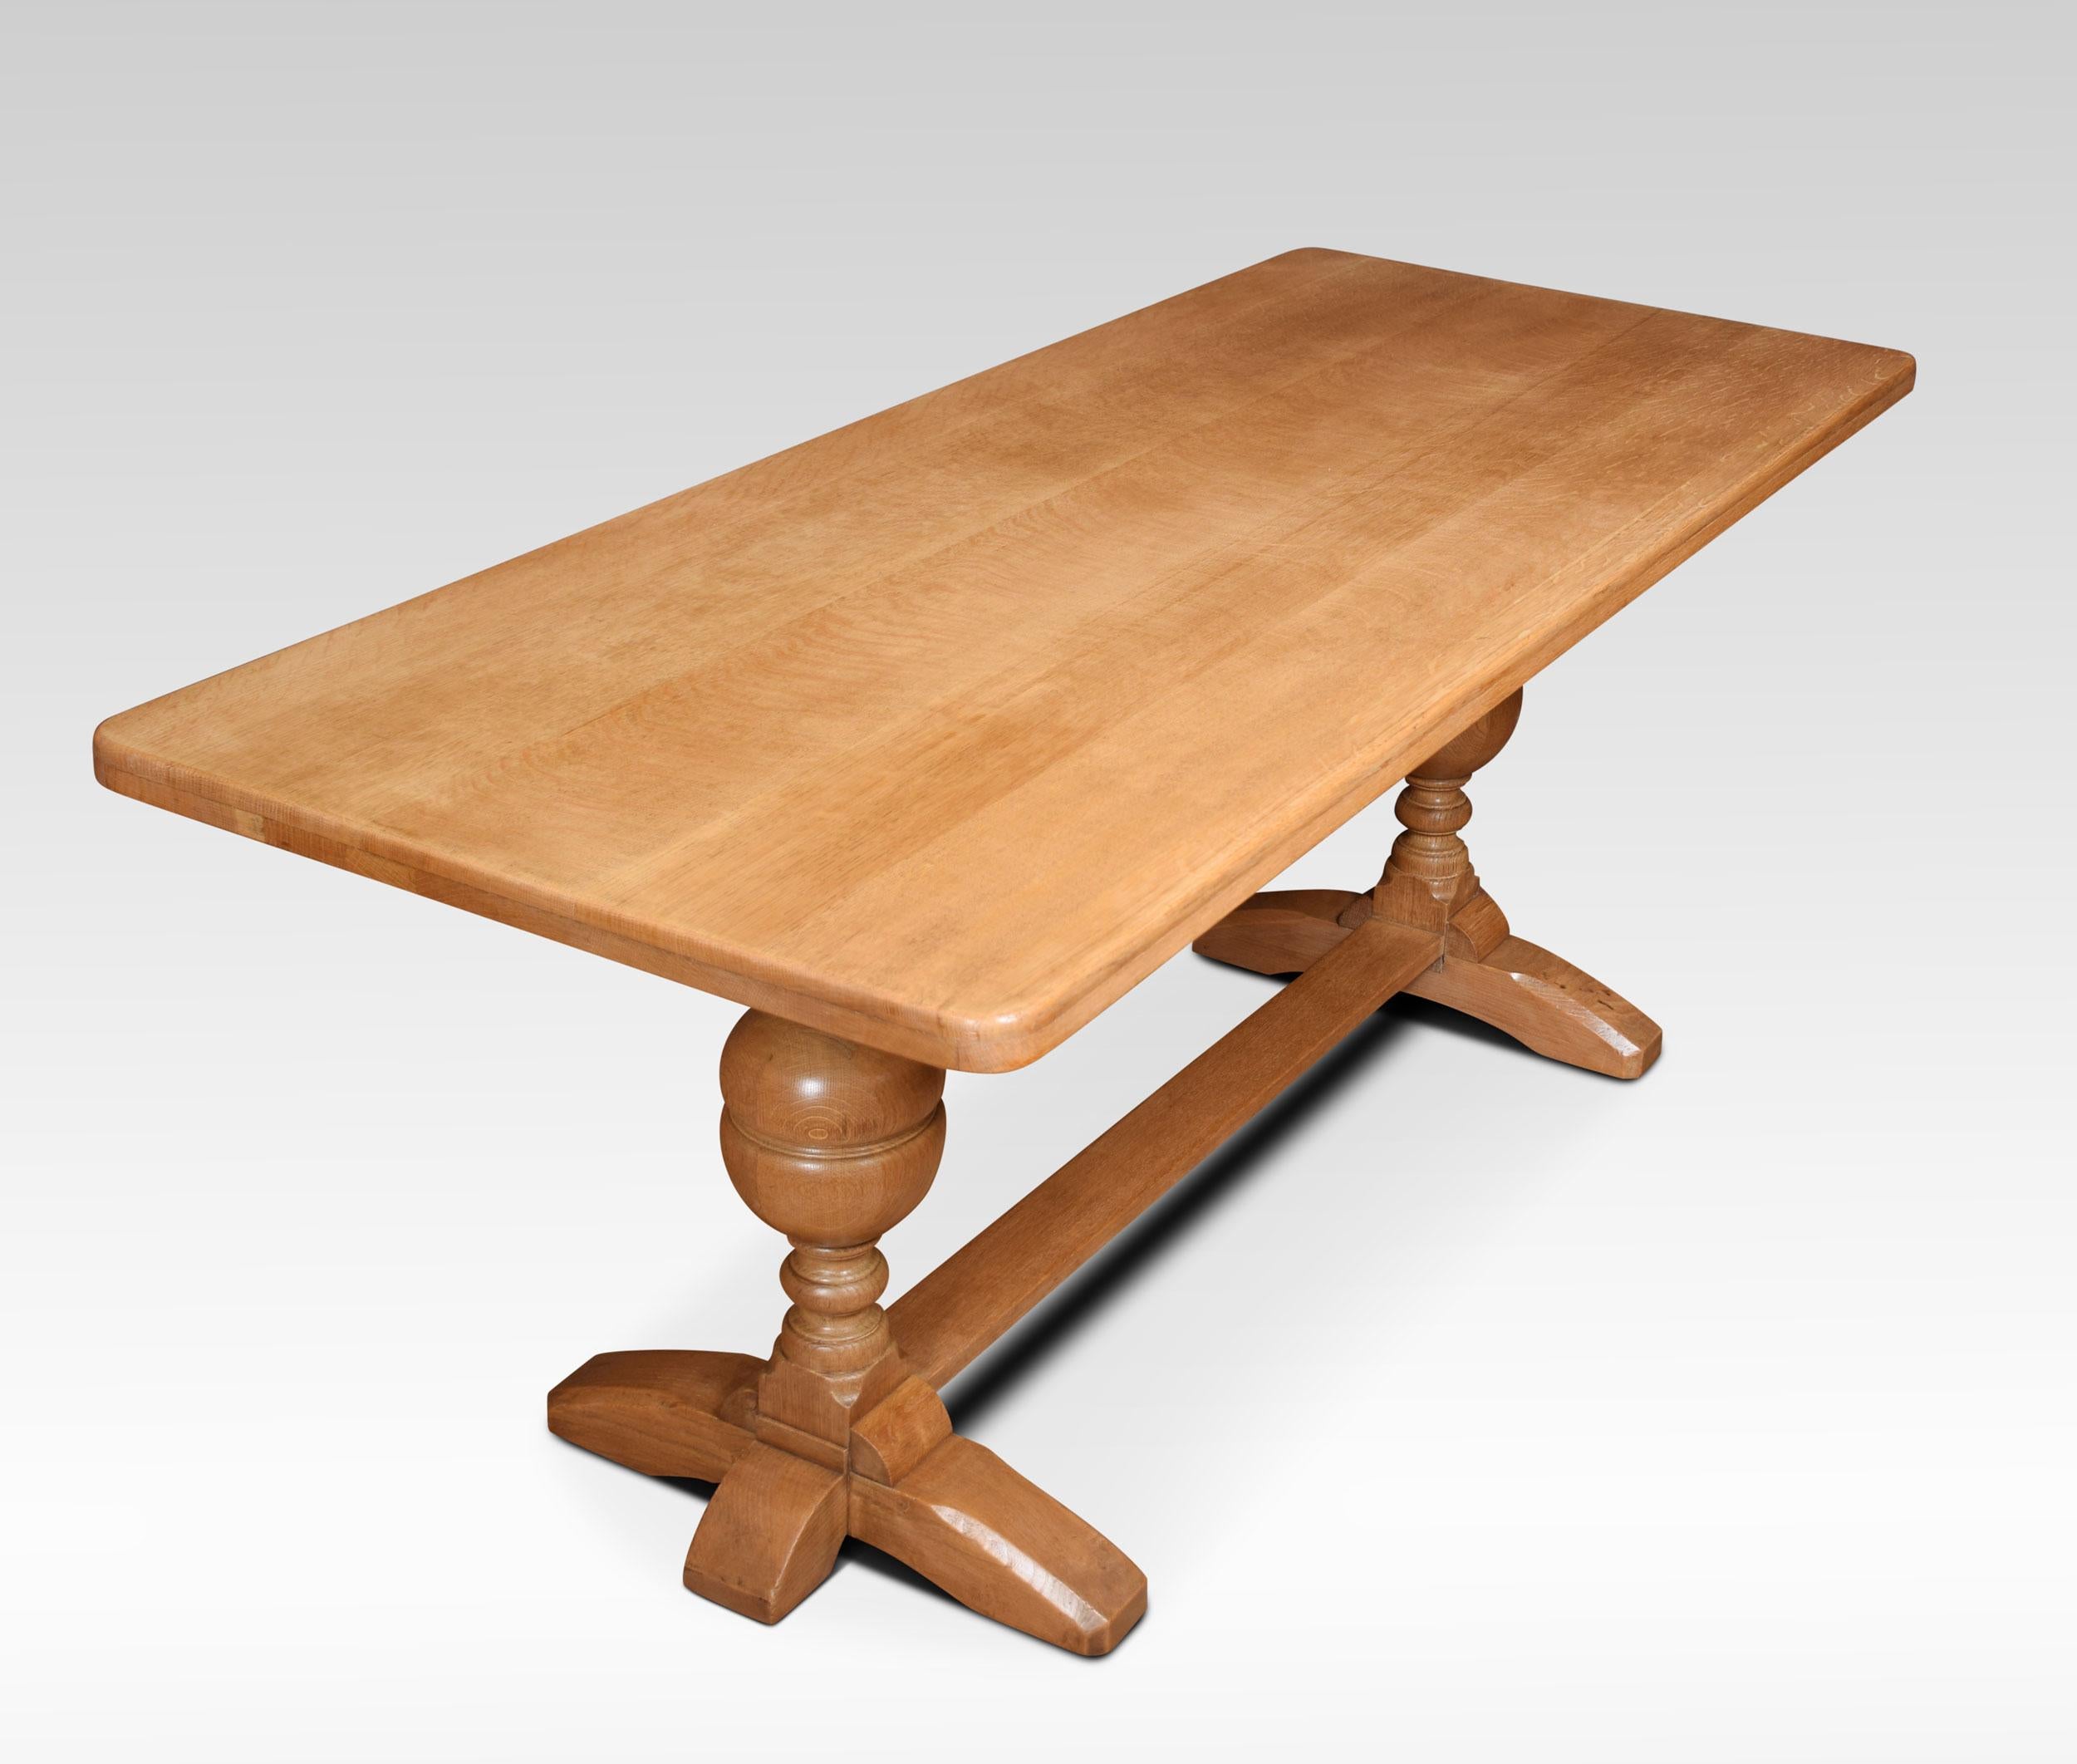 Solid oak refectory table, the rectangular plank top above moulded freeze. Raised up on two-lobed cup and cover supports united by a stretcher.
Dimensions
Height 29 Inches
Width 72 Inches
Depth 29.5 Inches.